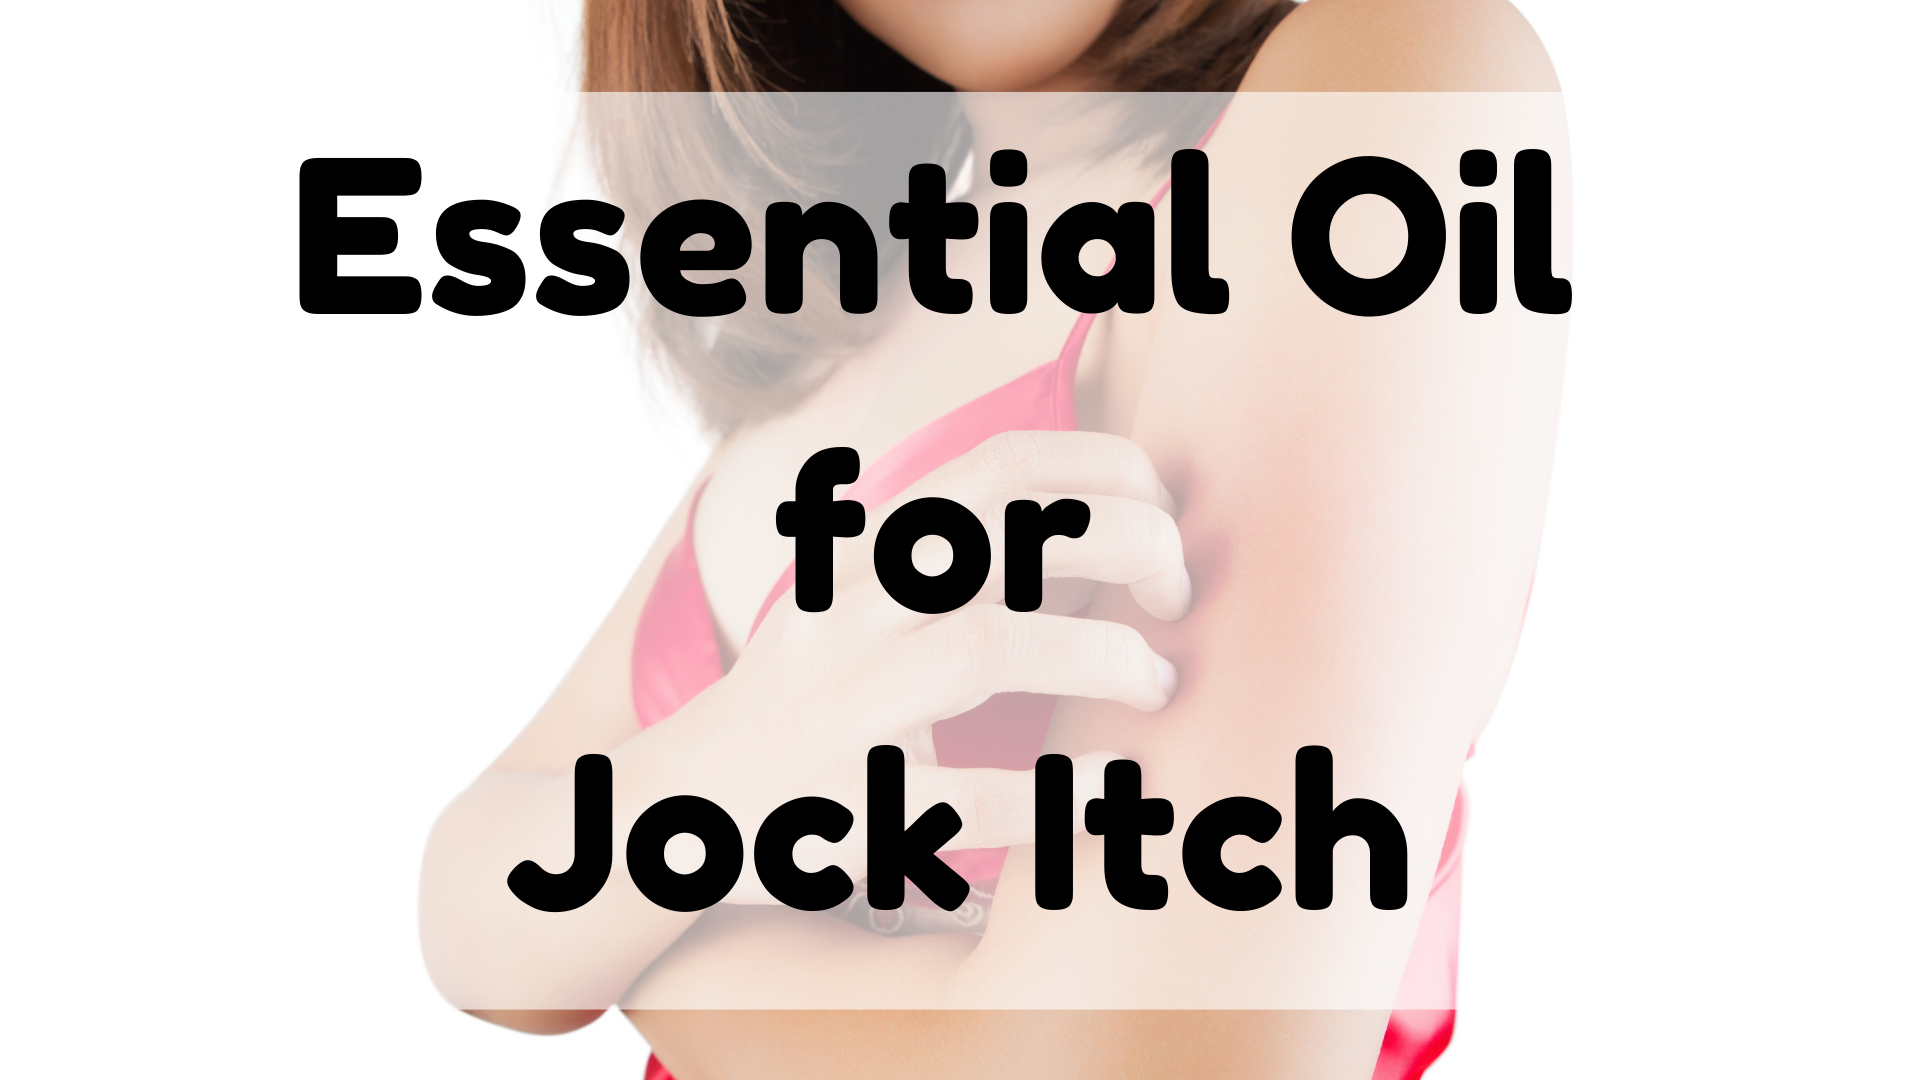 Essential Oil for Jock Itch featured image